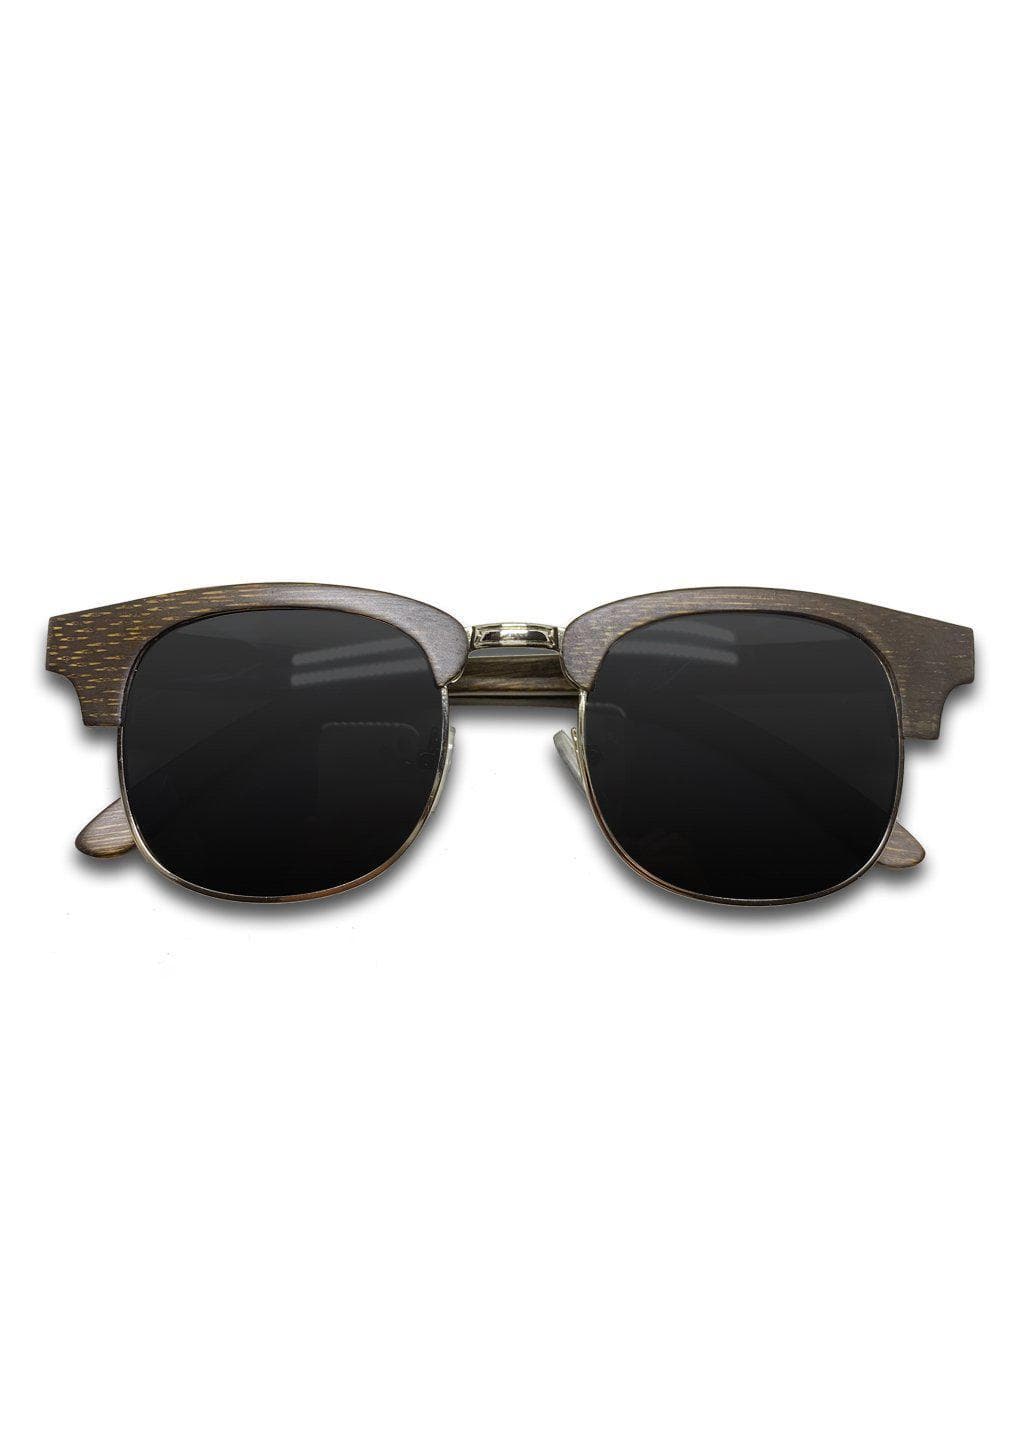 Eyewood Clubmasters is our cool take on classic model. This is Skyler with dark lenses. And also this model is made in all wood.